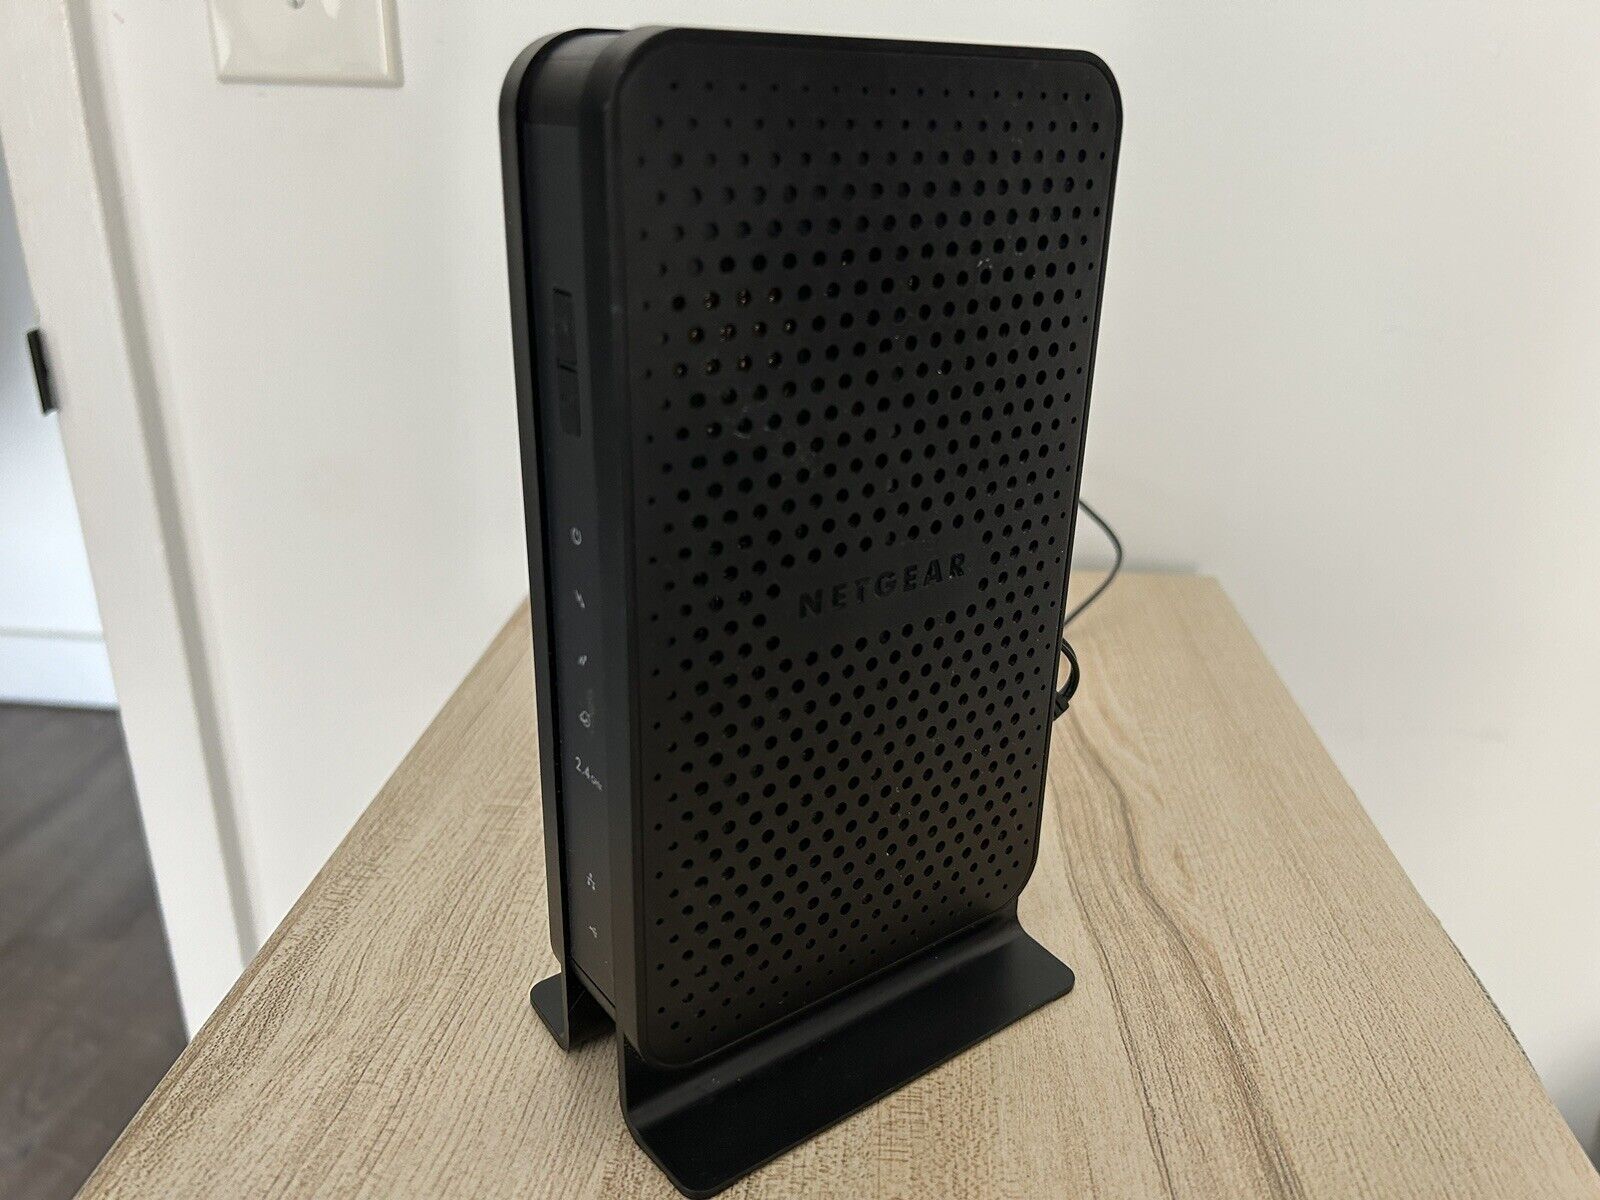 Netgear N300 C3000 WiFi/Cable Modem Router With Power Cord